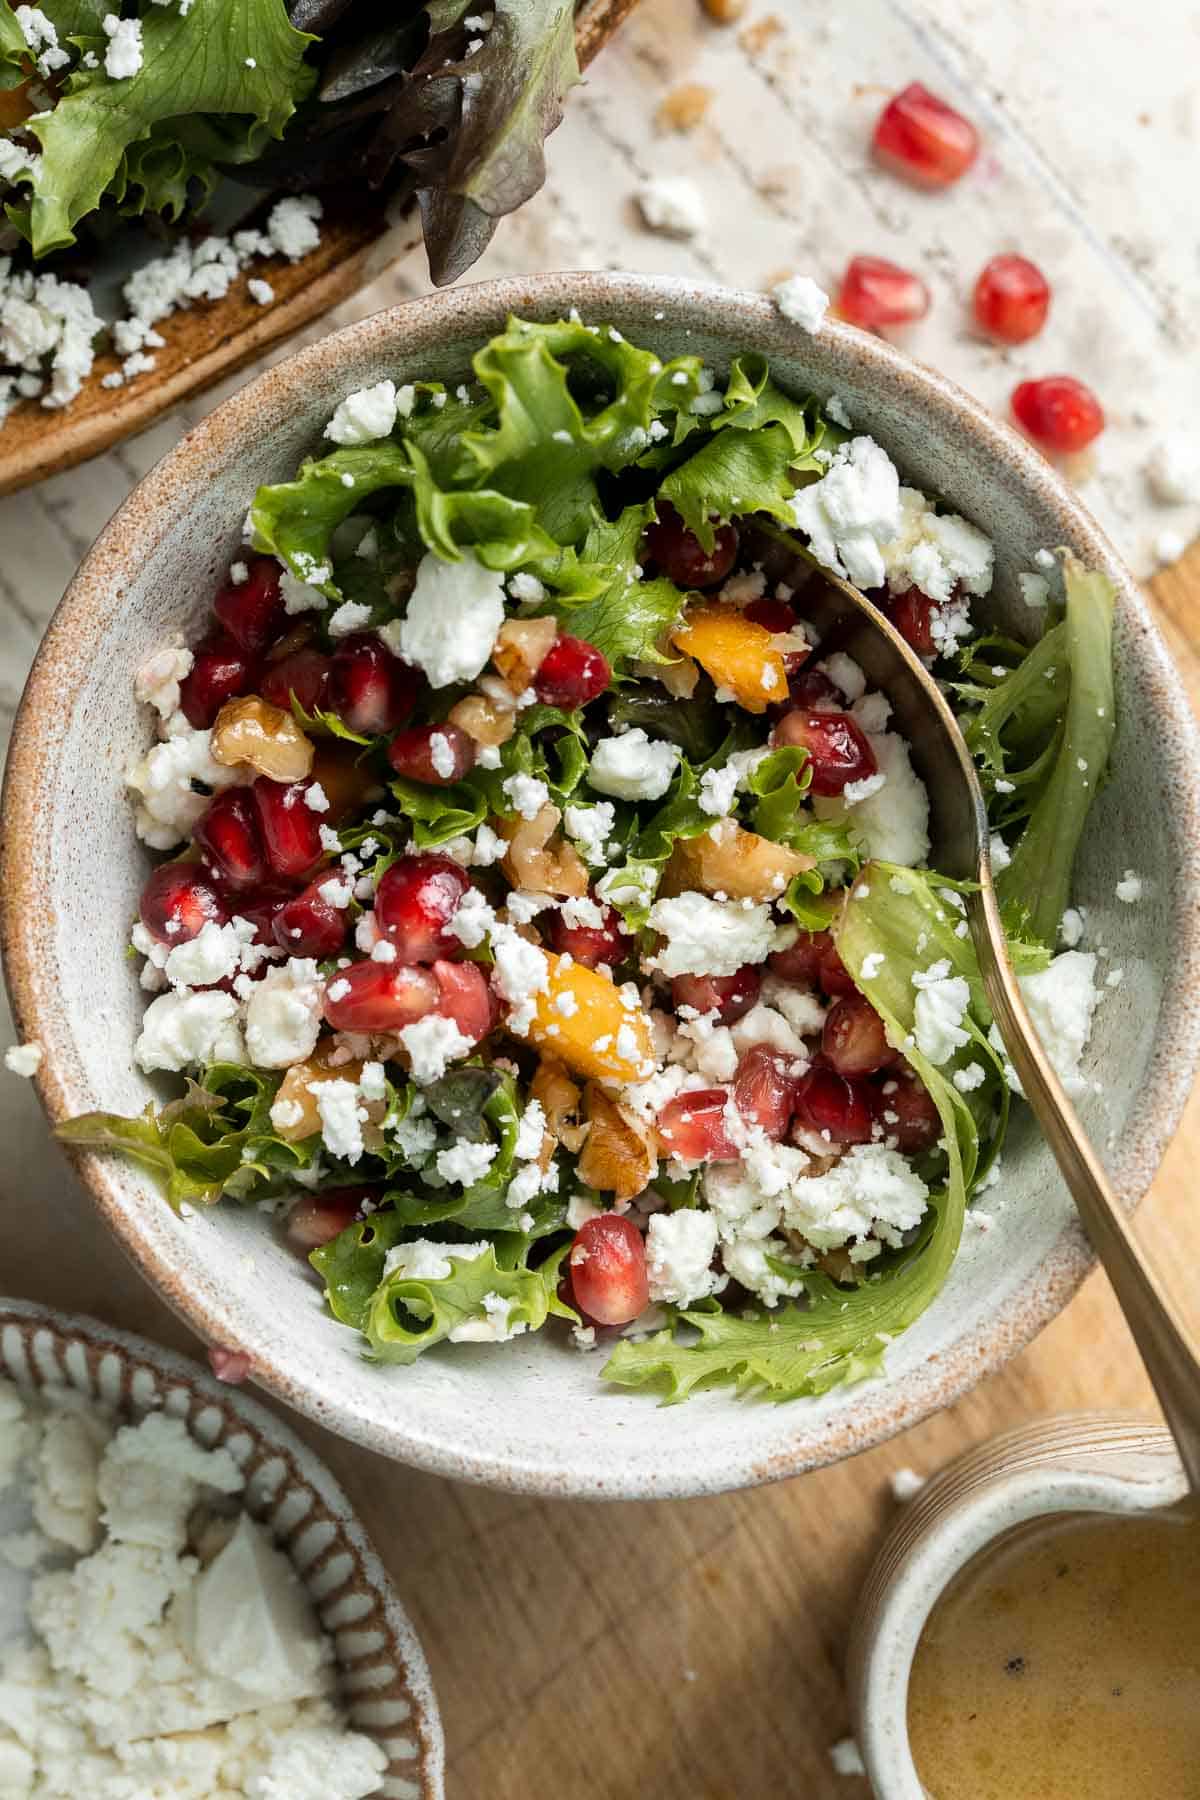 This fresh and festive Christmas Salad is made with delicious winter fruits and has a gorgeous wreath-like appearance. It’s earthy, sweet, nutty, and tangy. | aheadofthyme.com